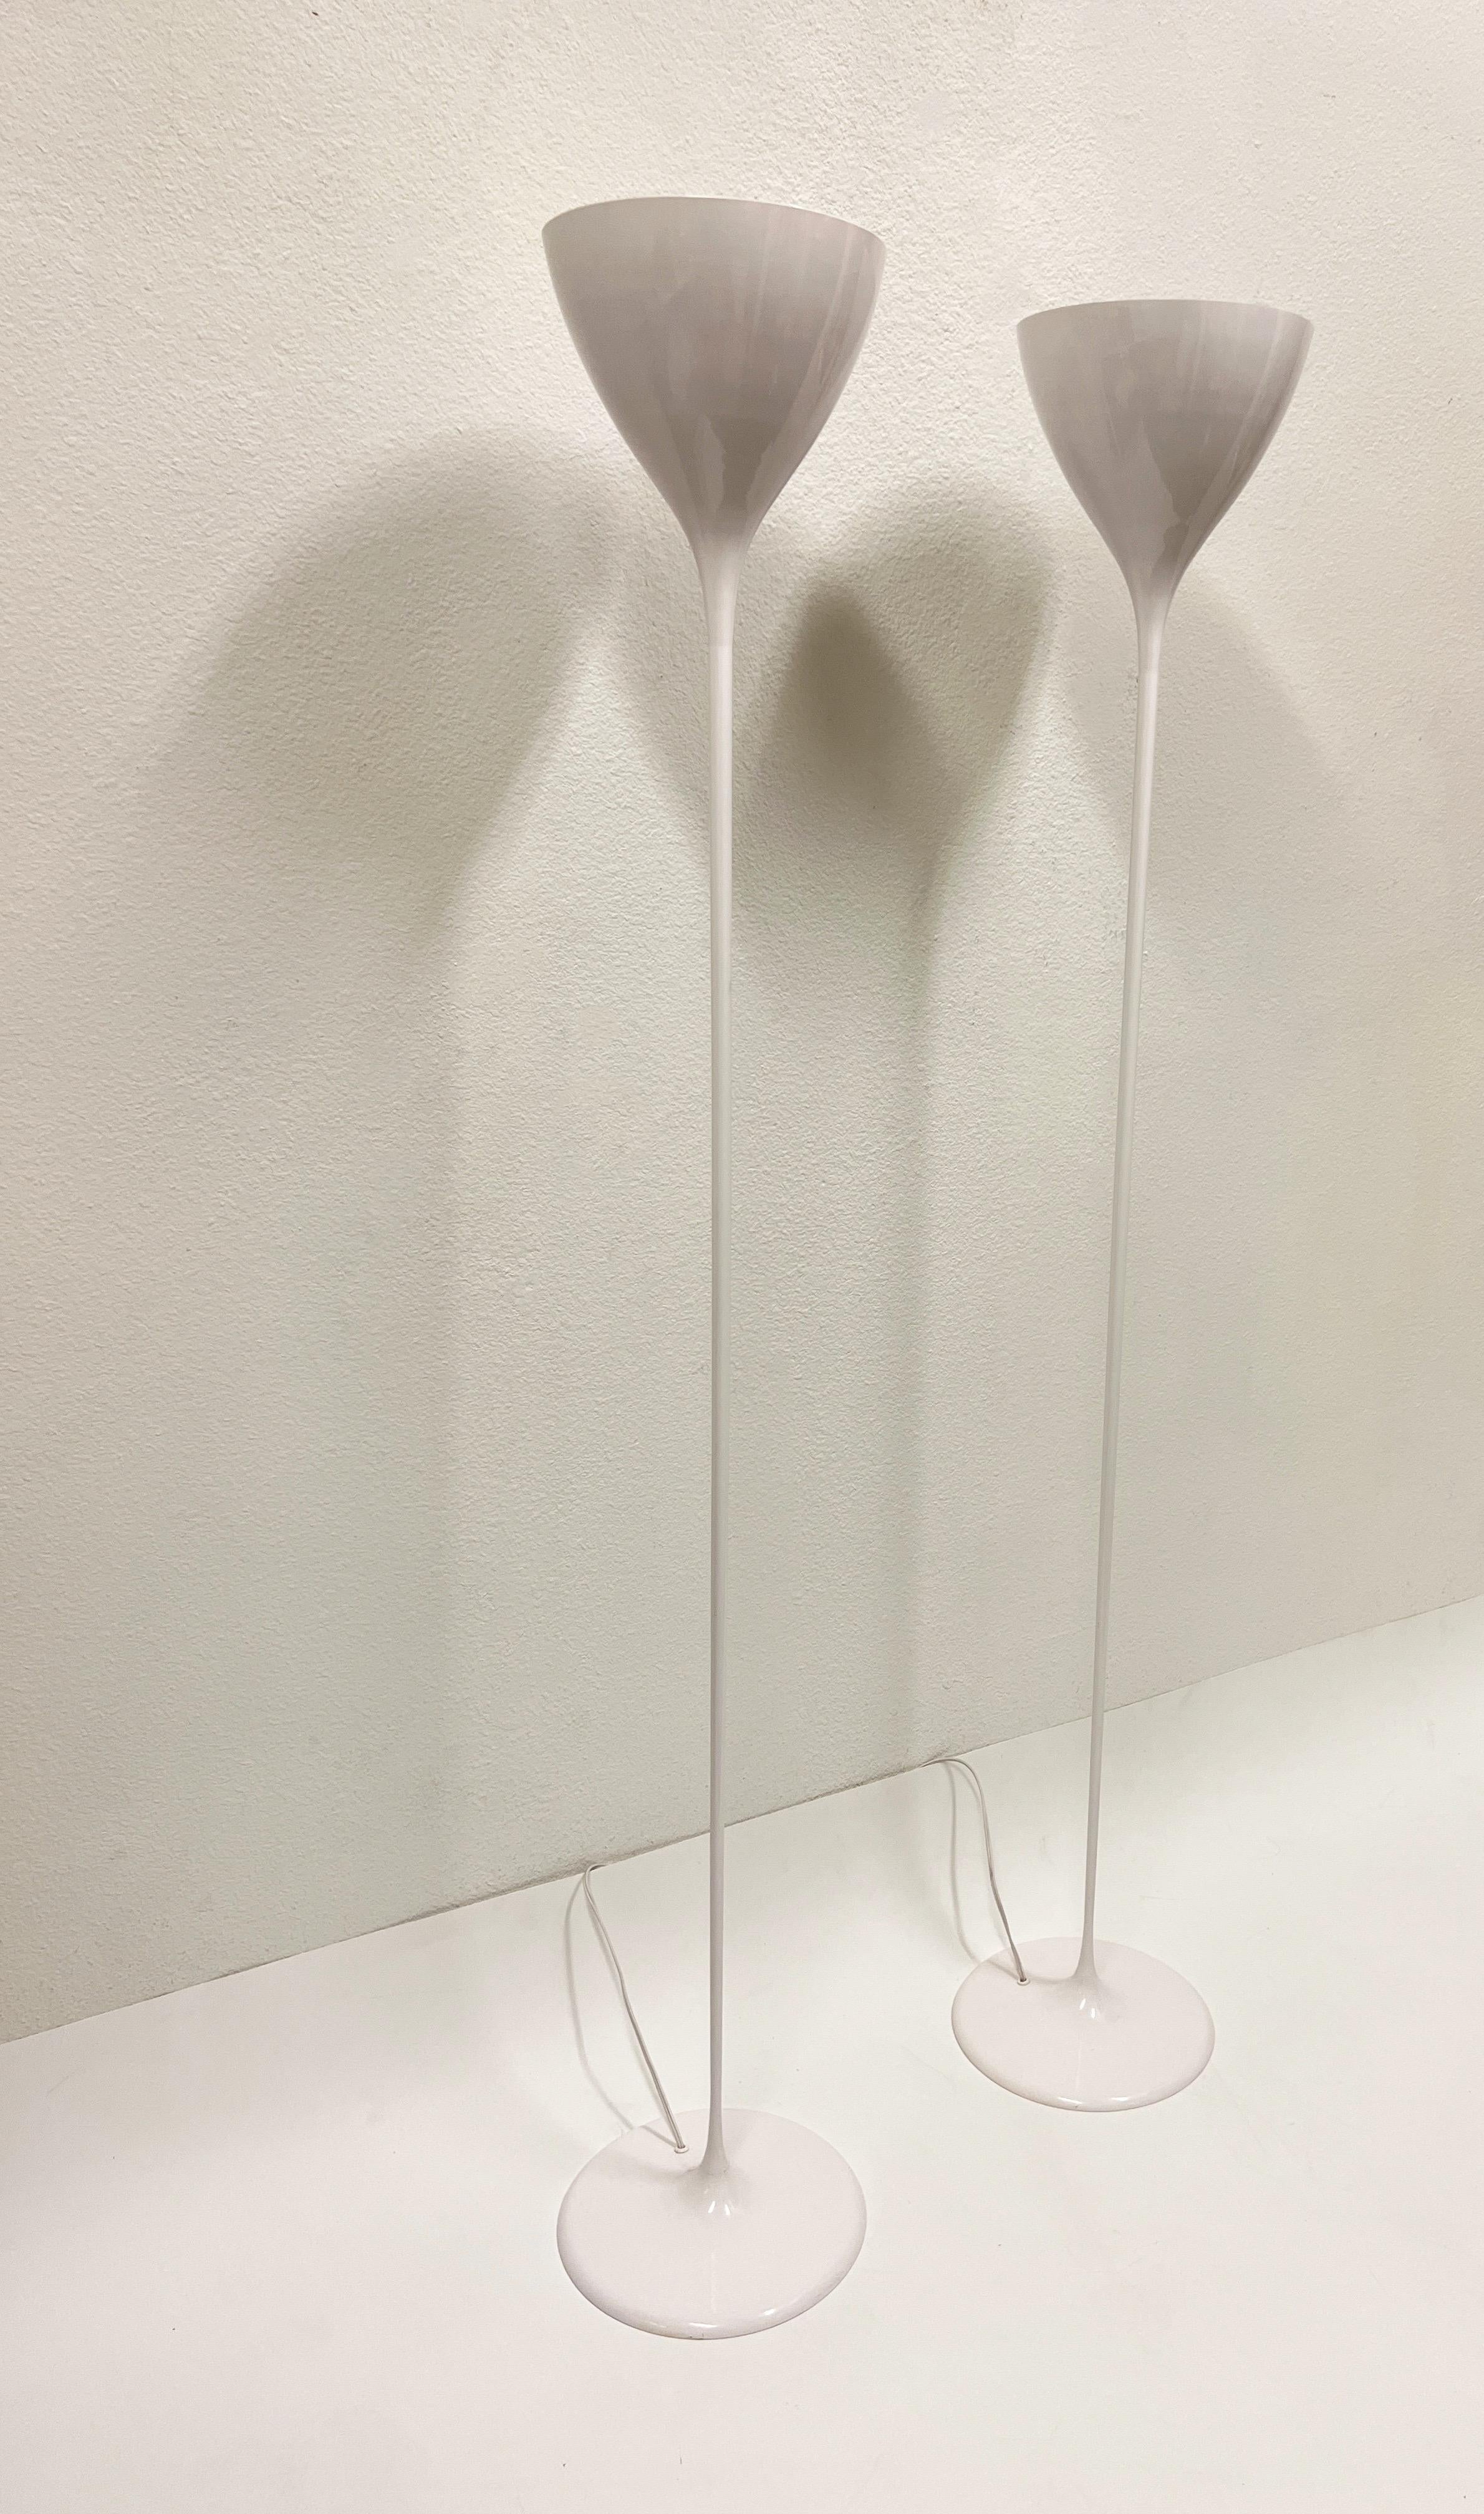 1970’s Sculptural pair white powdered coated torchieres floor lamps by Swedish Architect Max Bill. 
Newly rewired. They take 100w Max Edison lightbulb. 
Measurements: 64.75” high, 9.75” diameter shade, 11” diameter base.